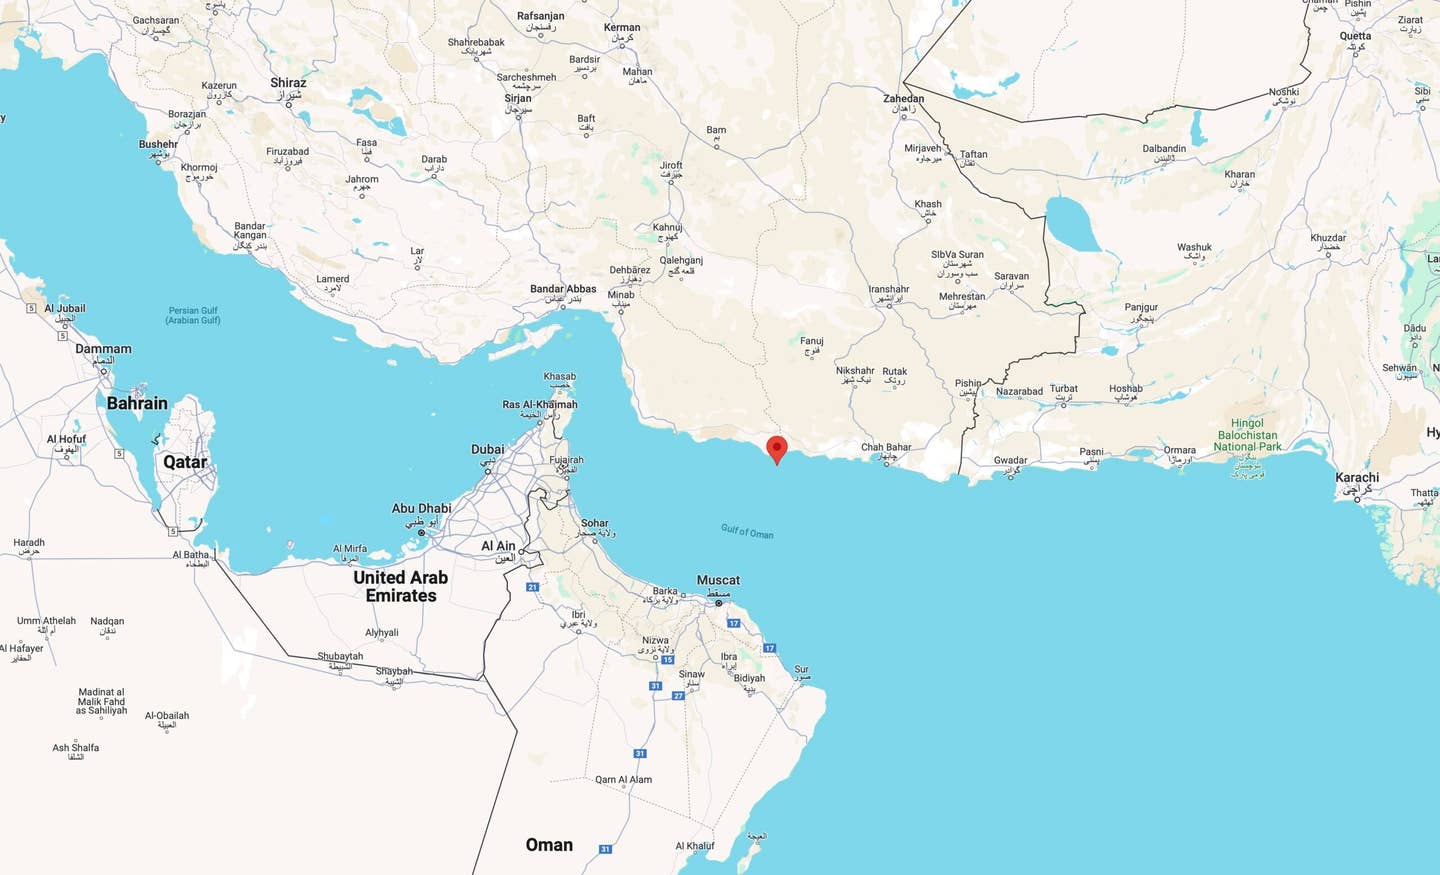 Estimated location of the vessel in the Gulf of Oman. <em>Google Maps</em>